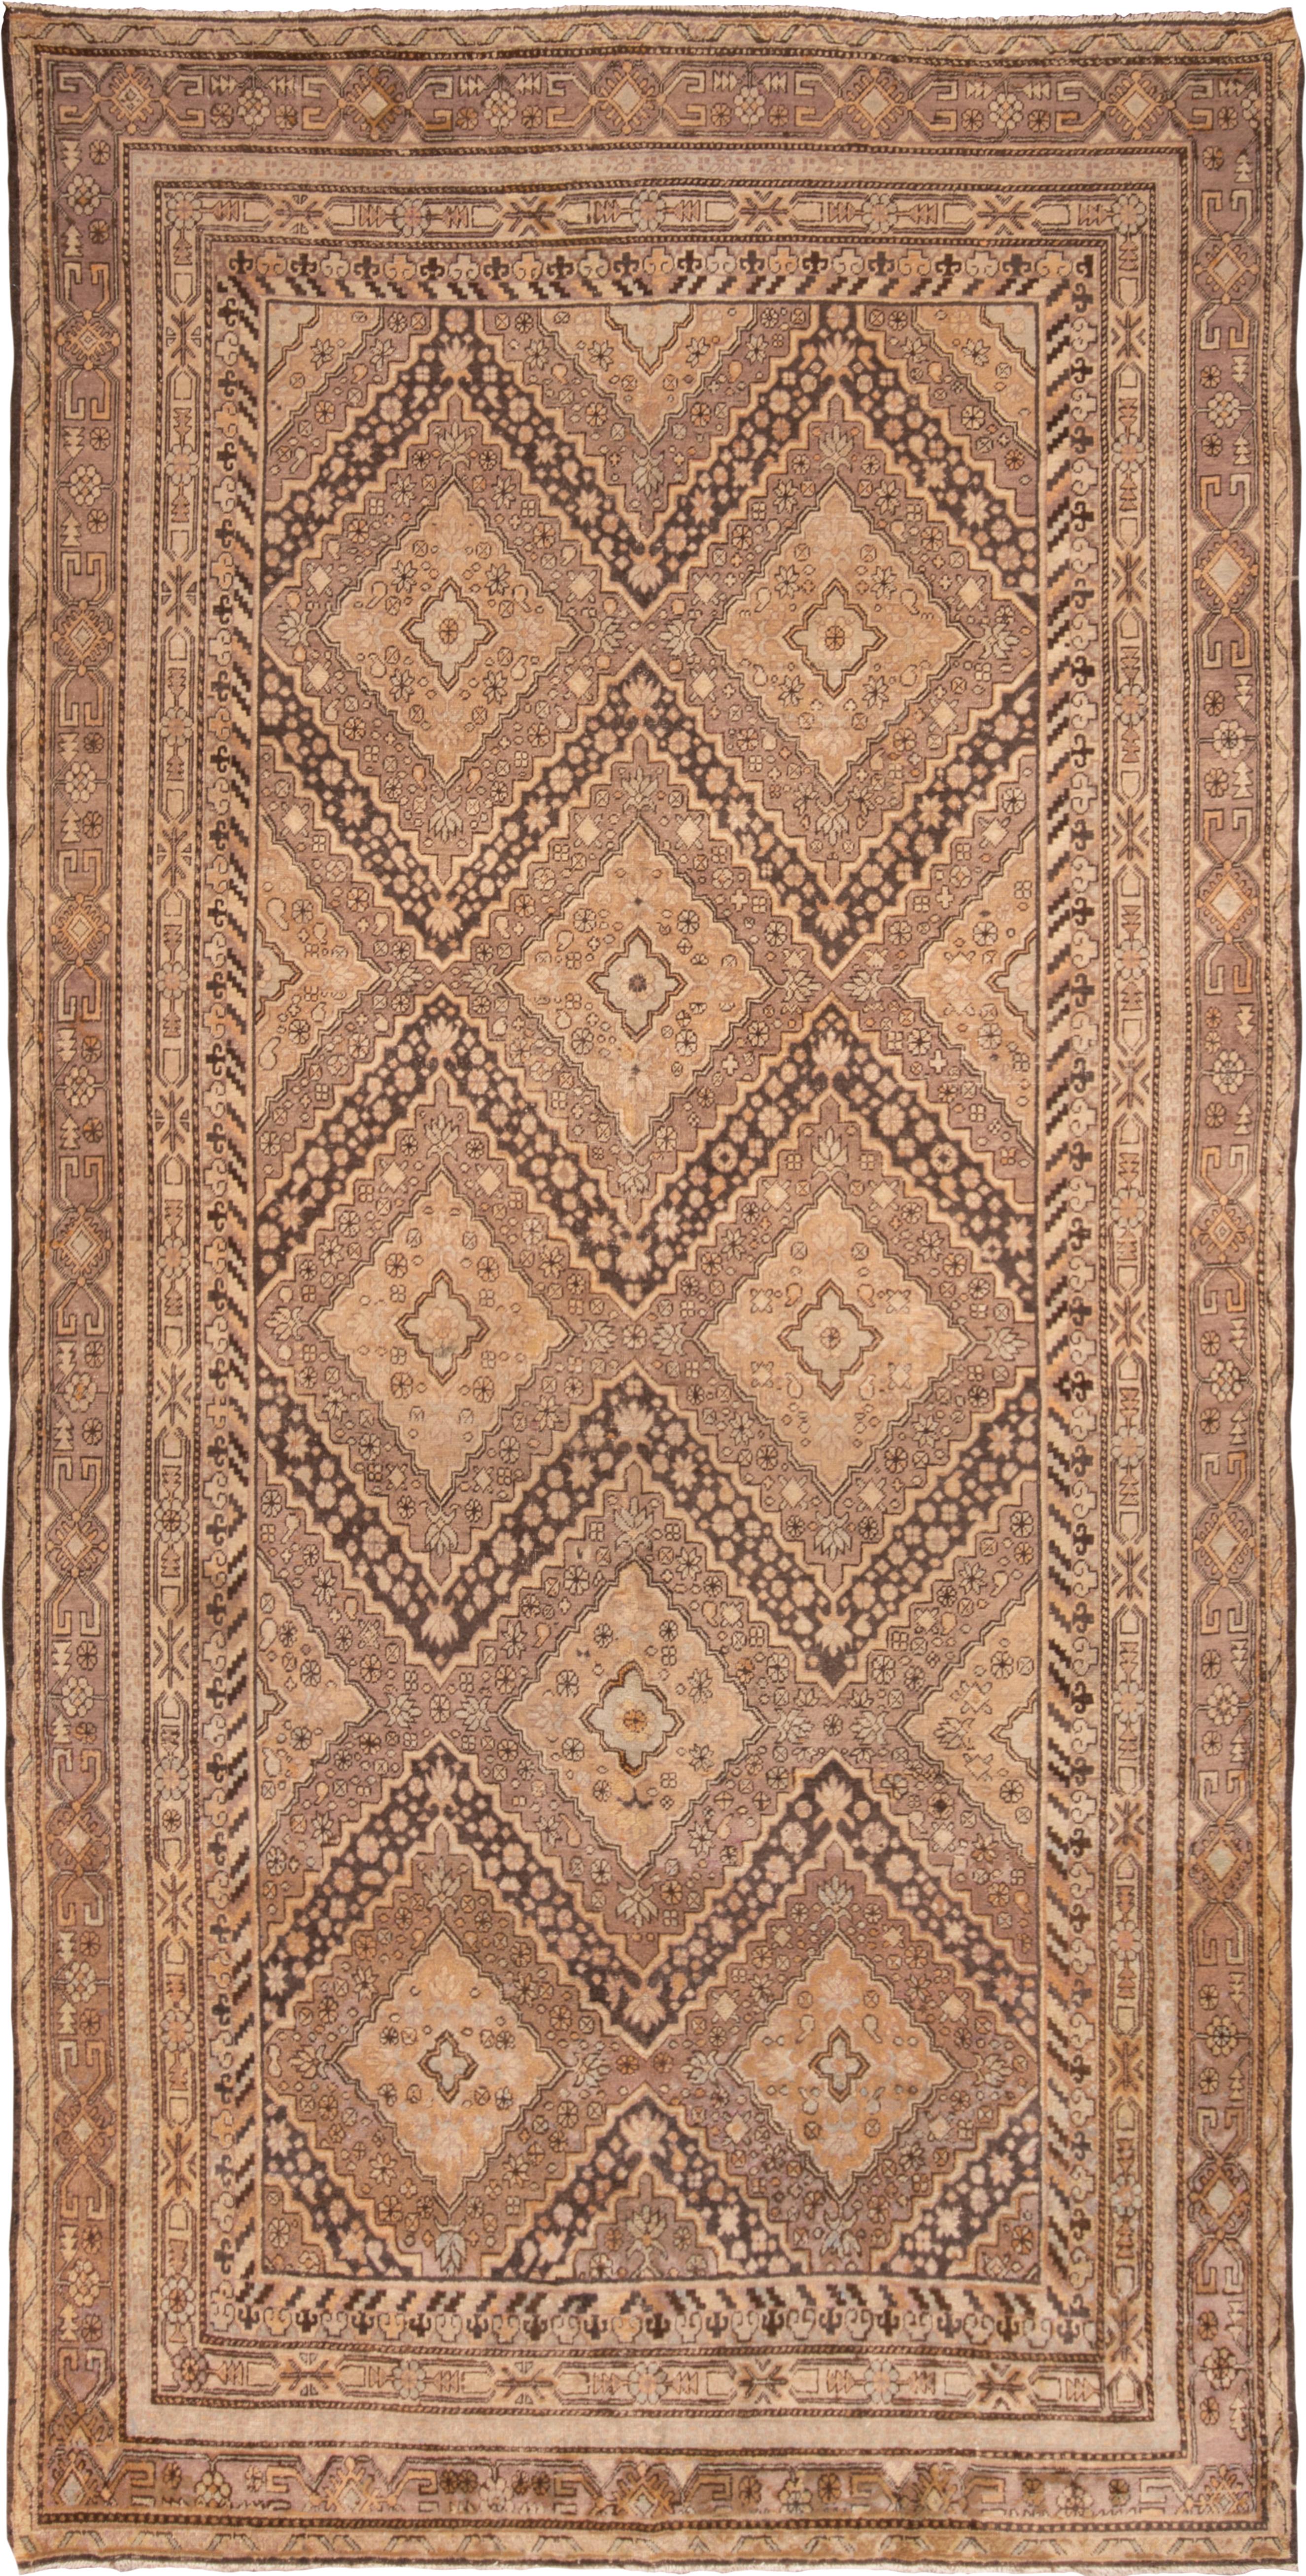 Originating from East Turkestan in 1960, this vintage transitional Khotan rug employs a unique midcentury approach to its geometric field pattern. Hand knotted in high-quality wool, the mesmeric black, beige, and brown medallions continue into other